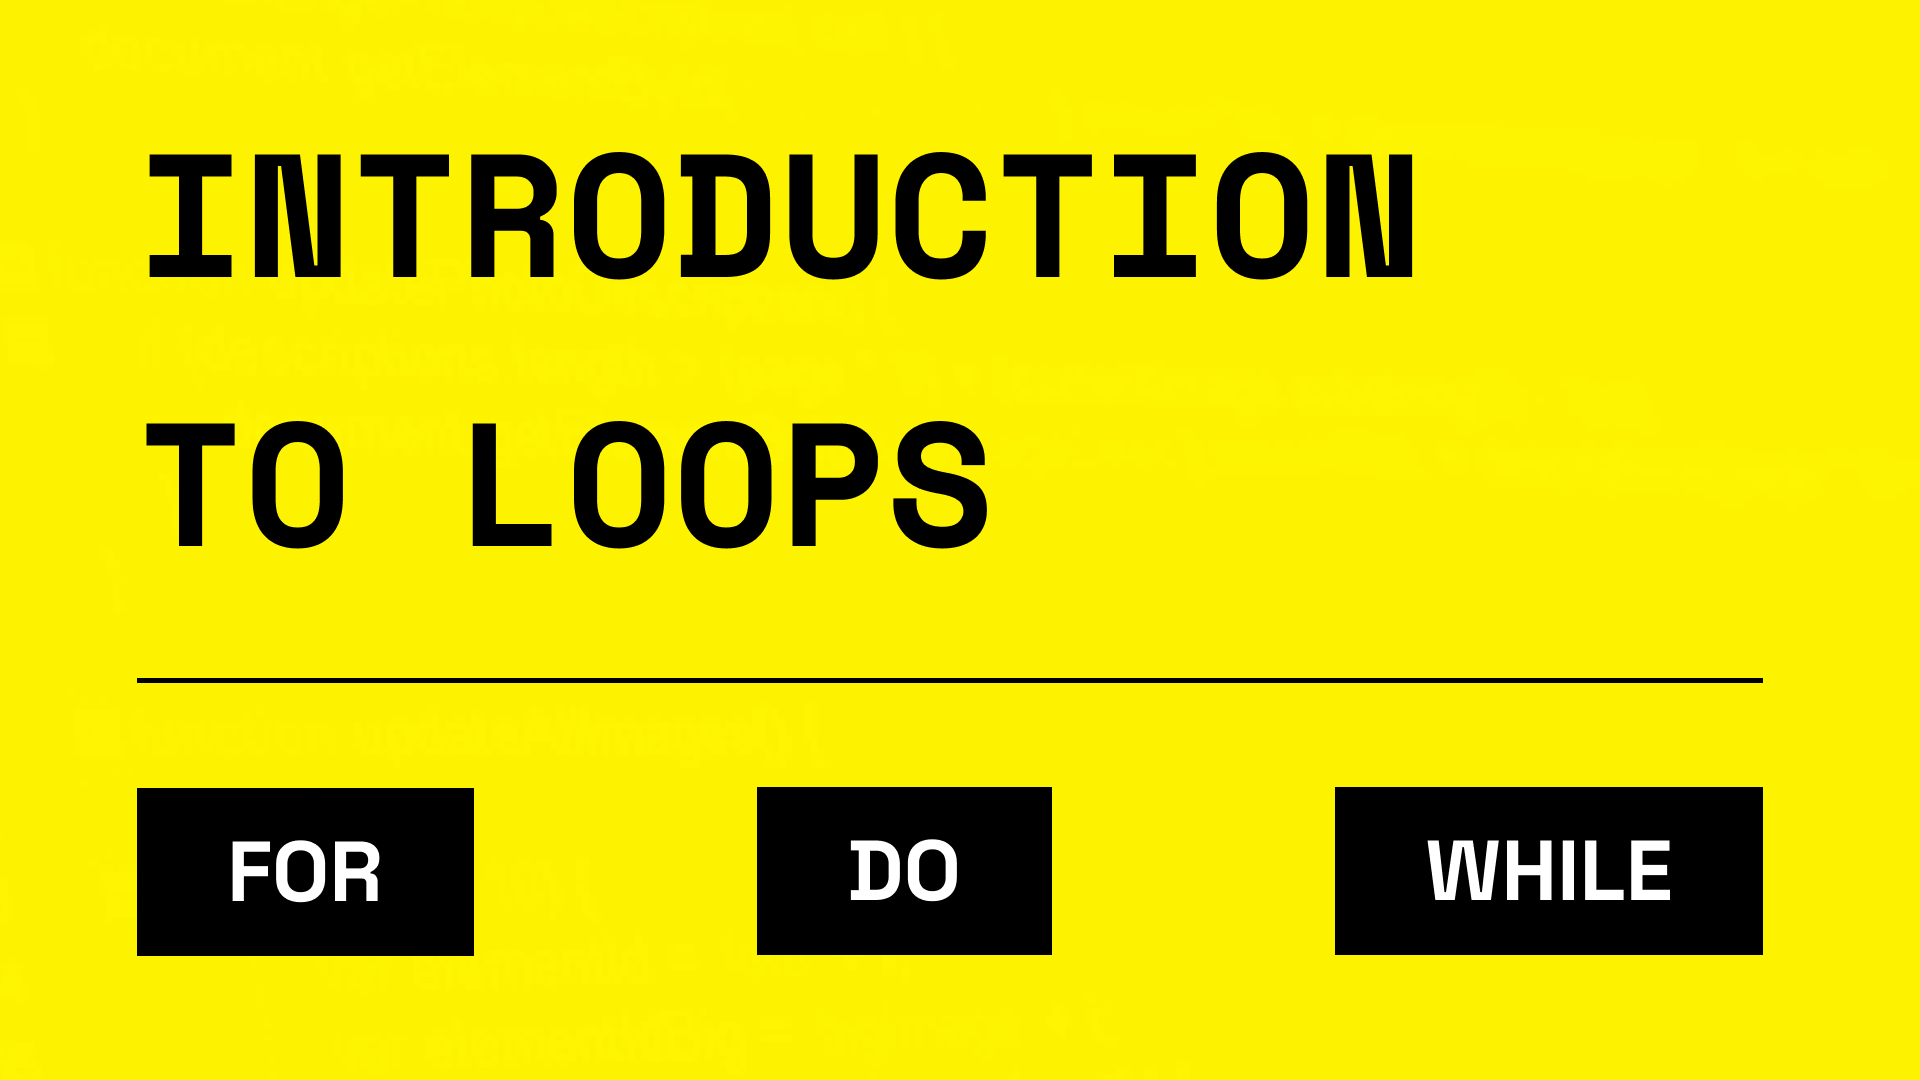 A basic introduction to loops in JavaScript